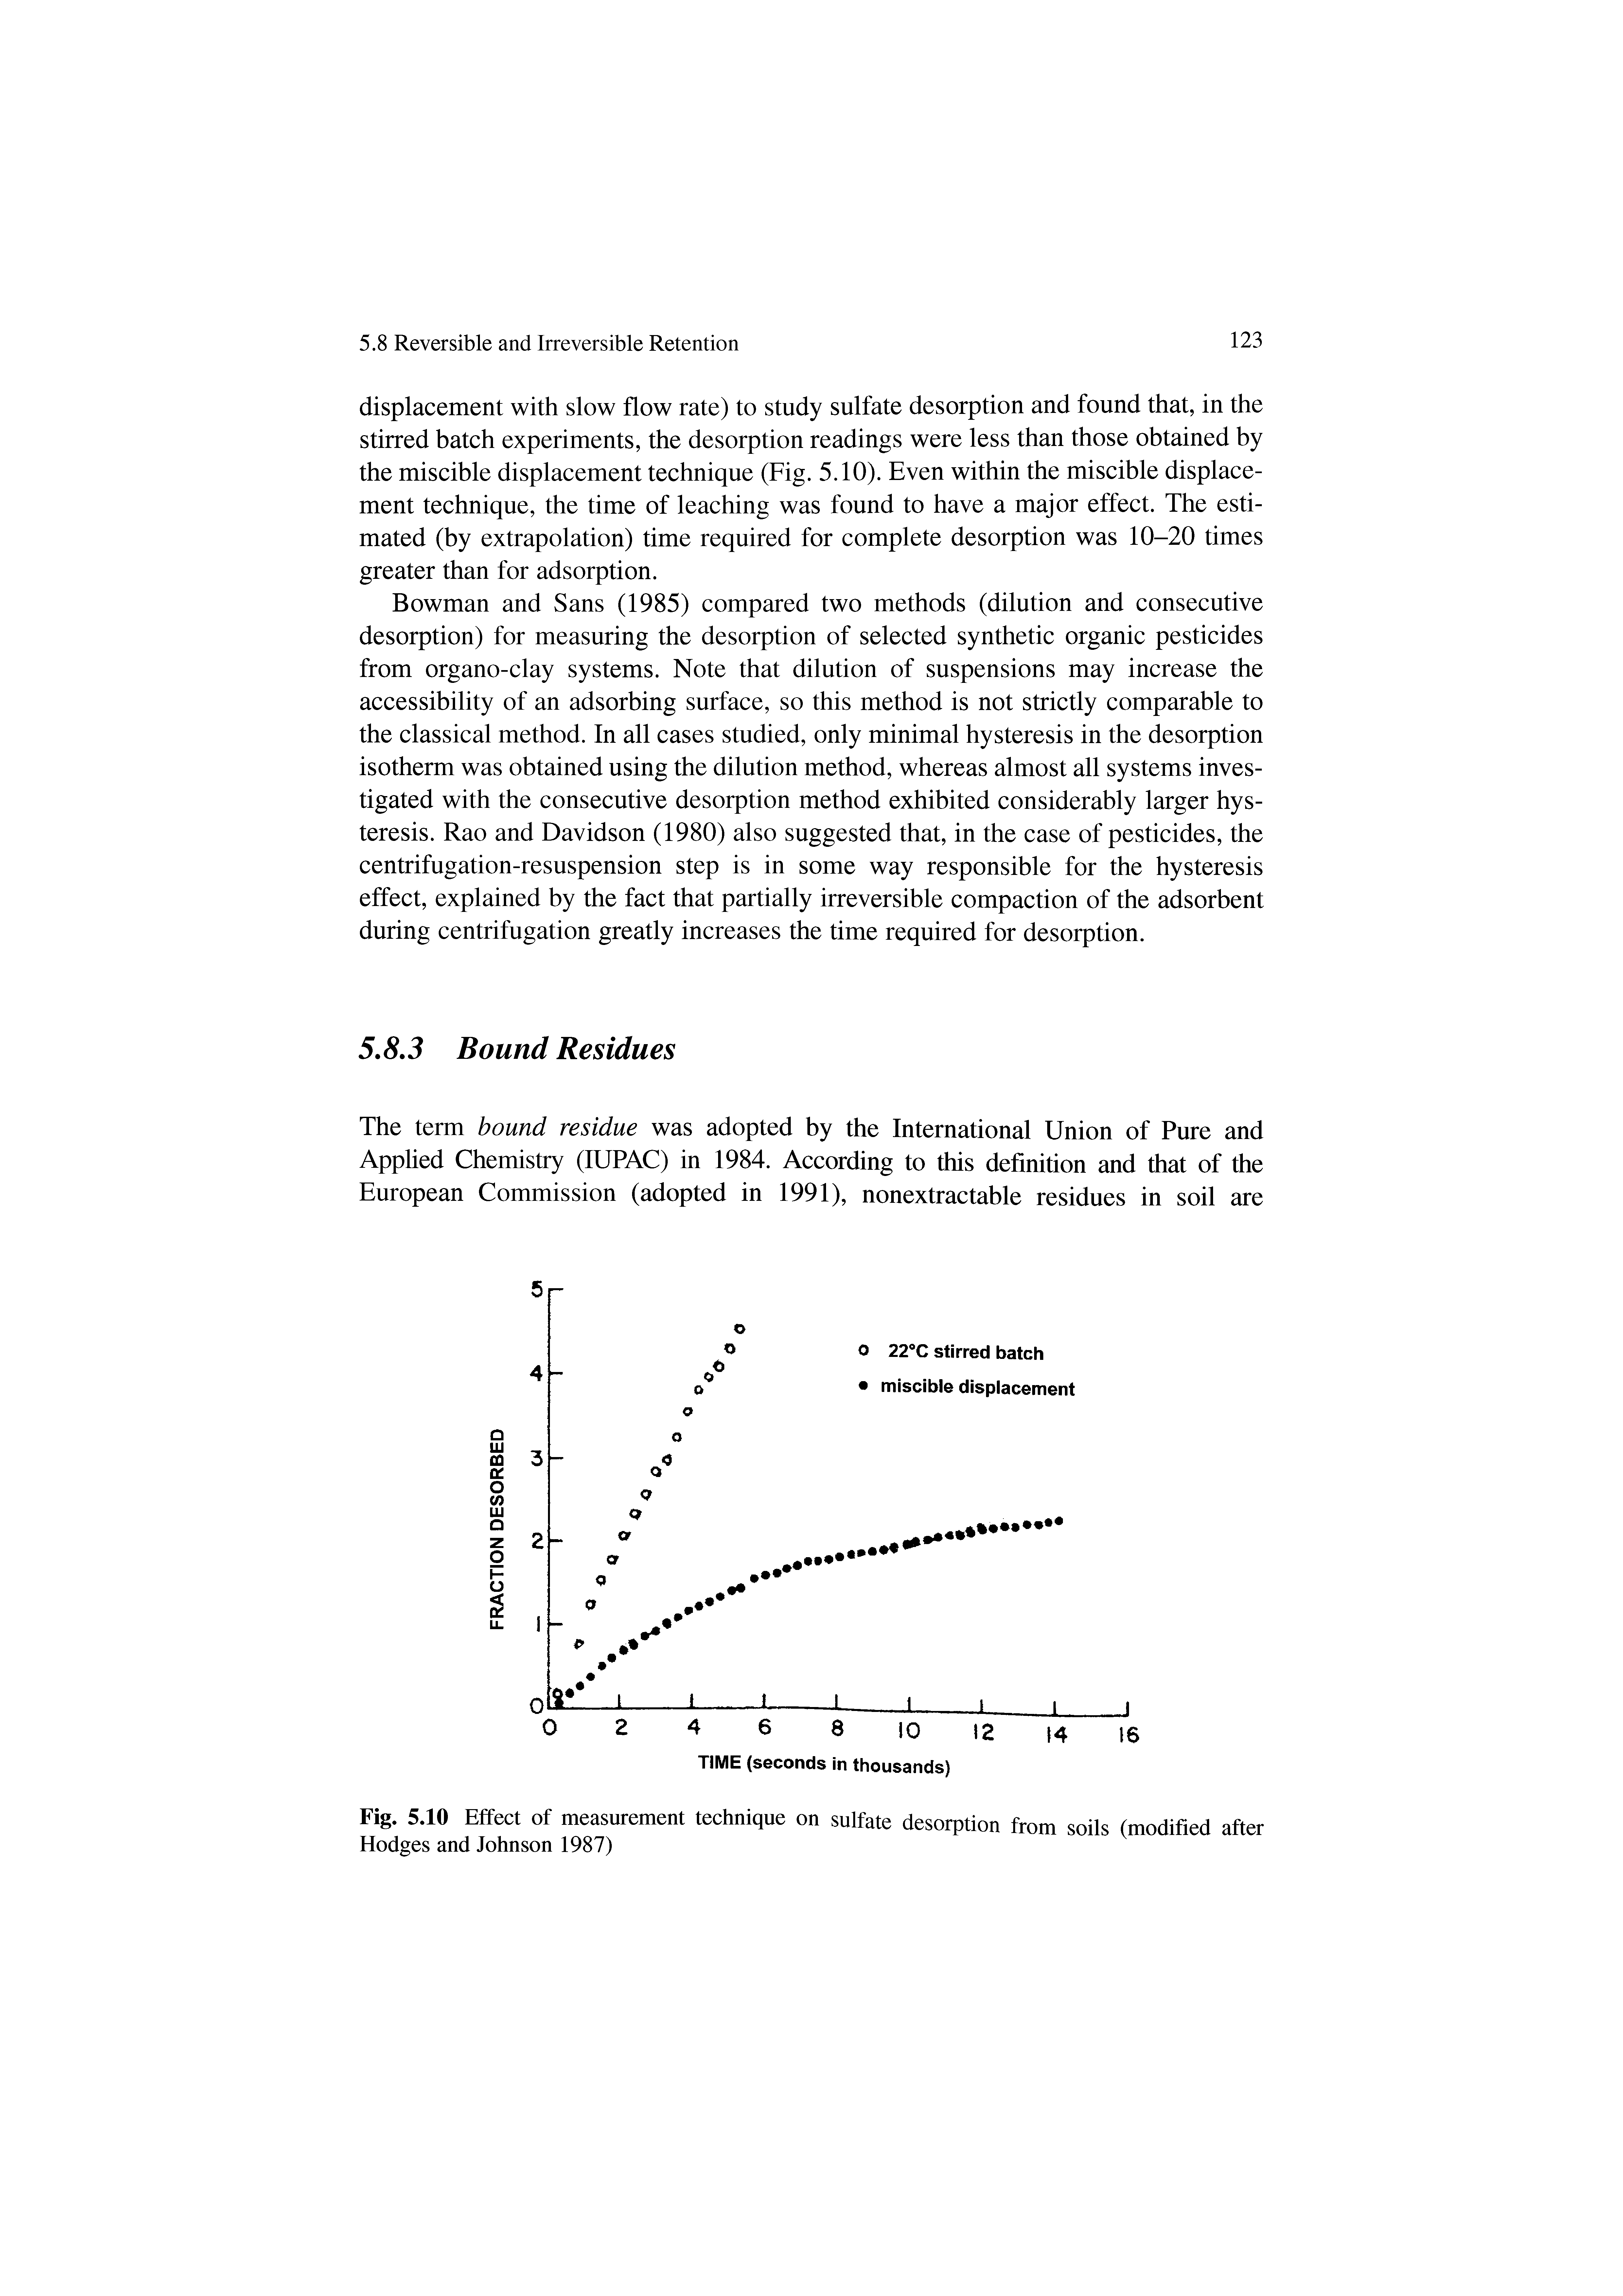 Fig. 5.10 Effect of measurement technique on sulfate desorption from soils (modified after Hodges and Johnson 1987)...